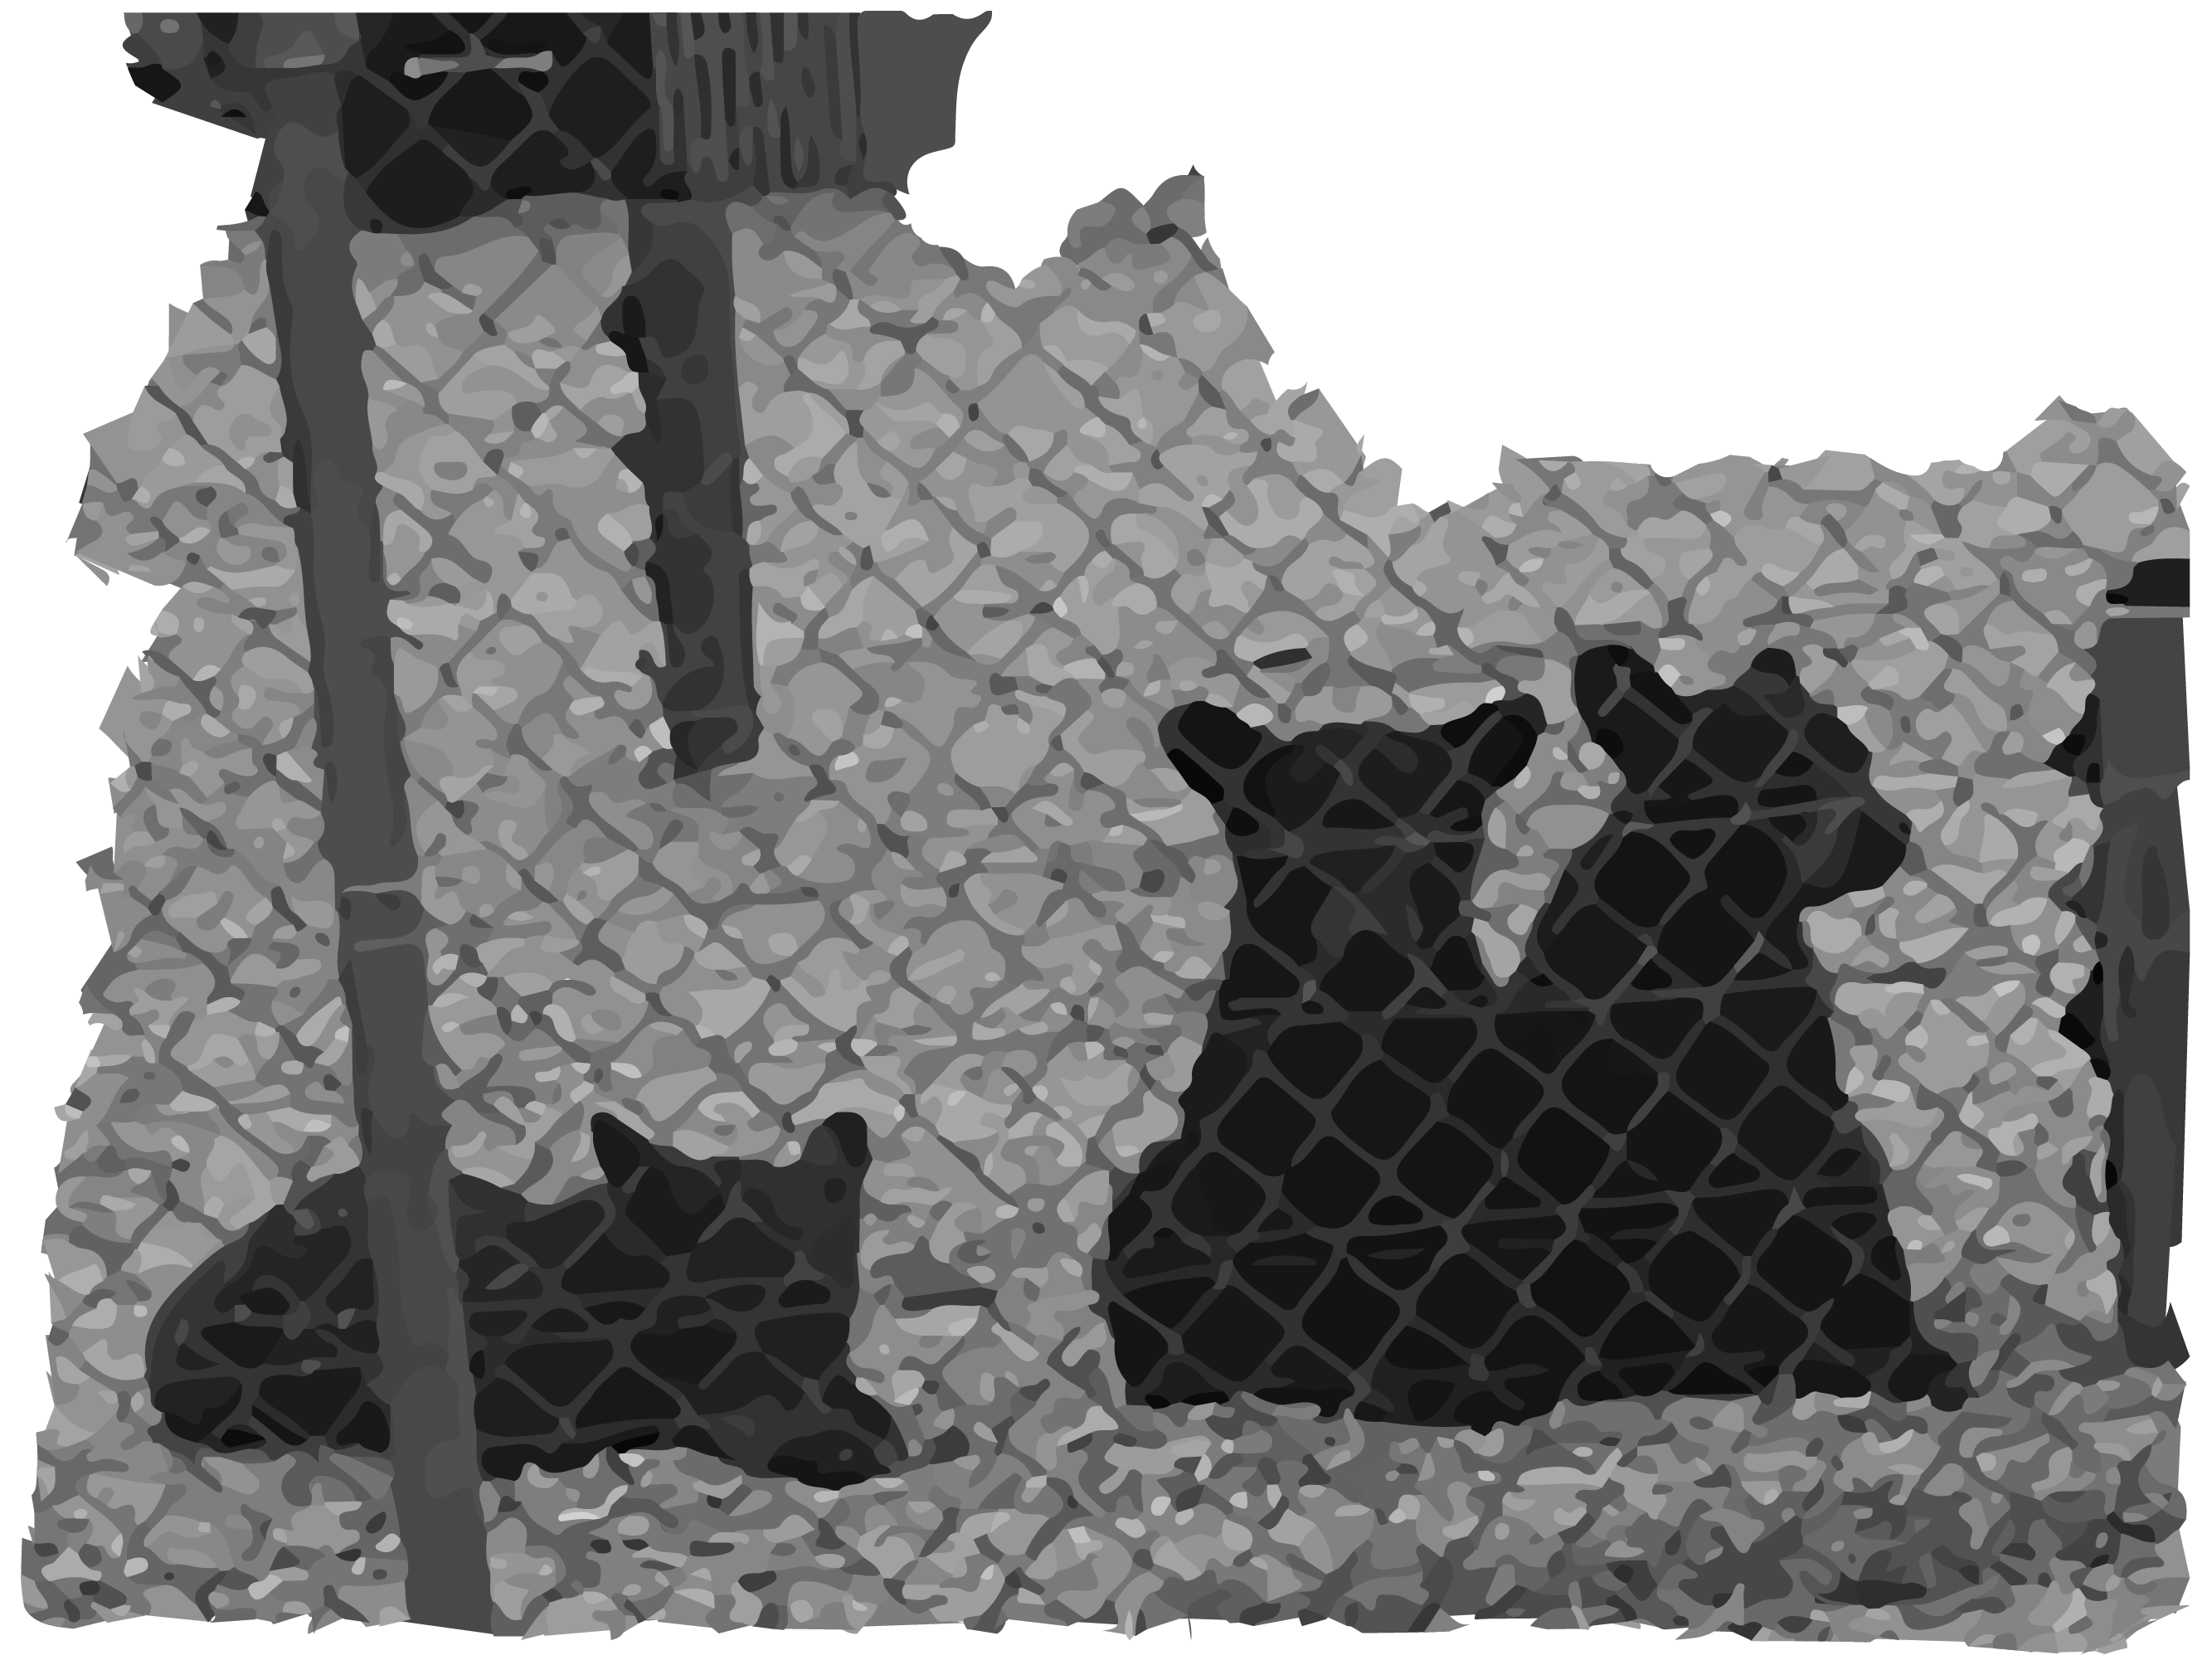 three yellowstone bear world black bear cubs waiting for public bottle feeding behind electric fence and the photo frame is in the shape of Idaho